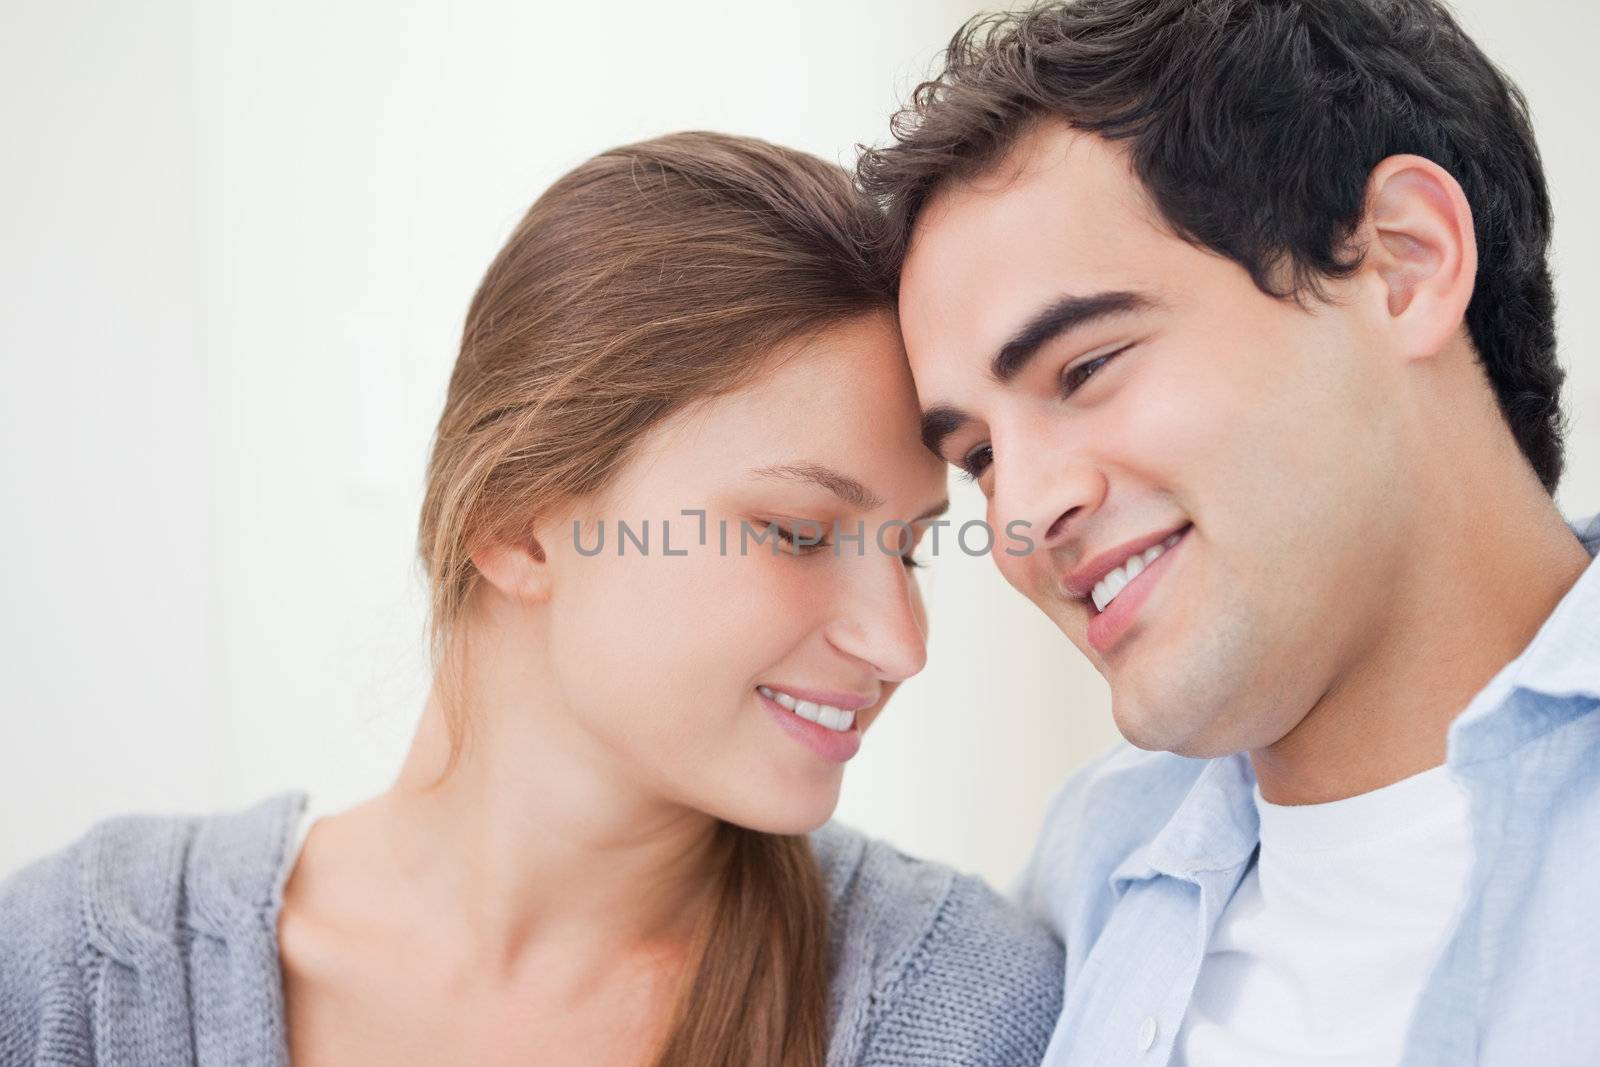 Young Couple embracing each other against a grey background 